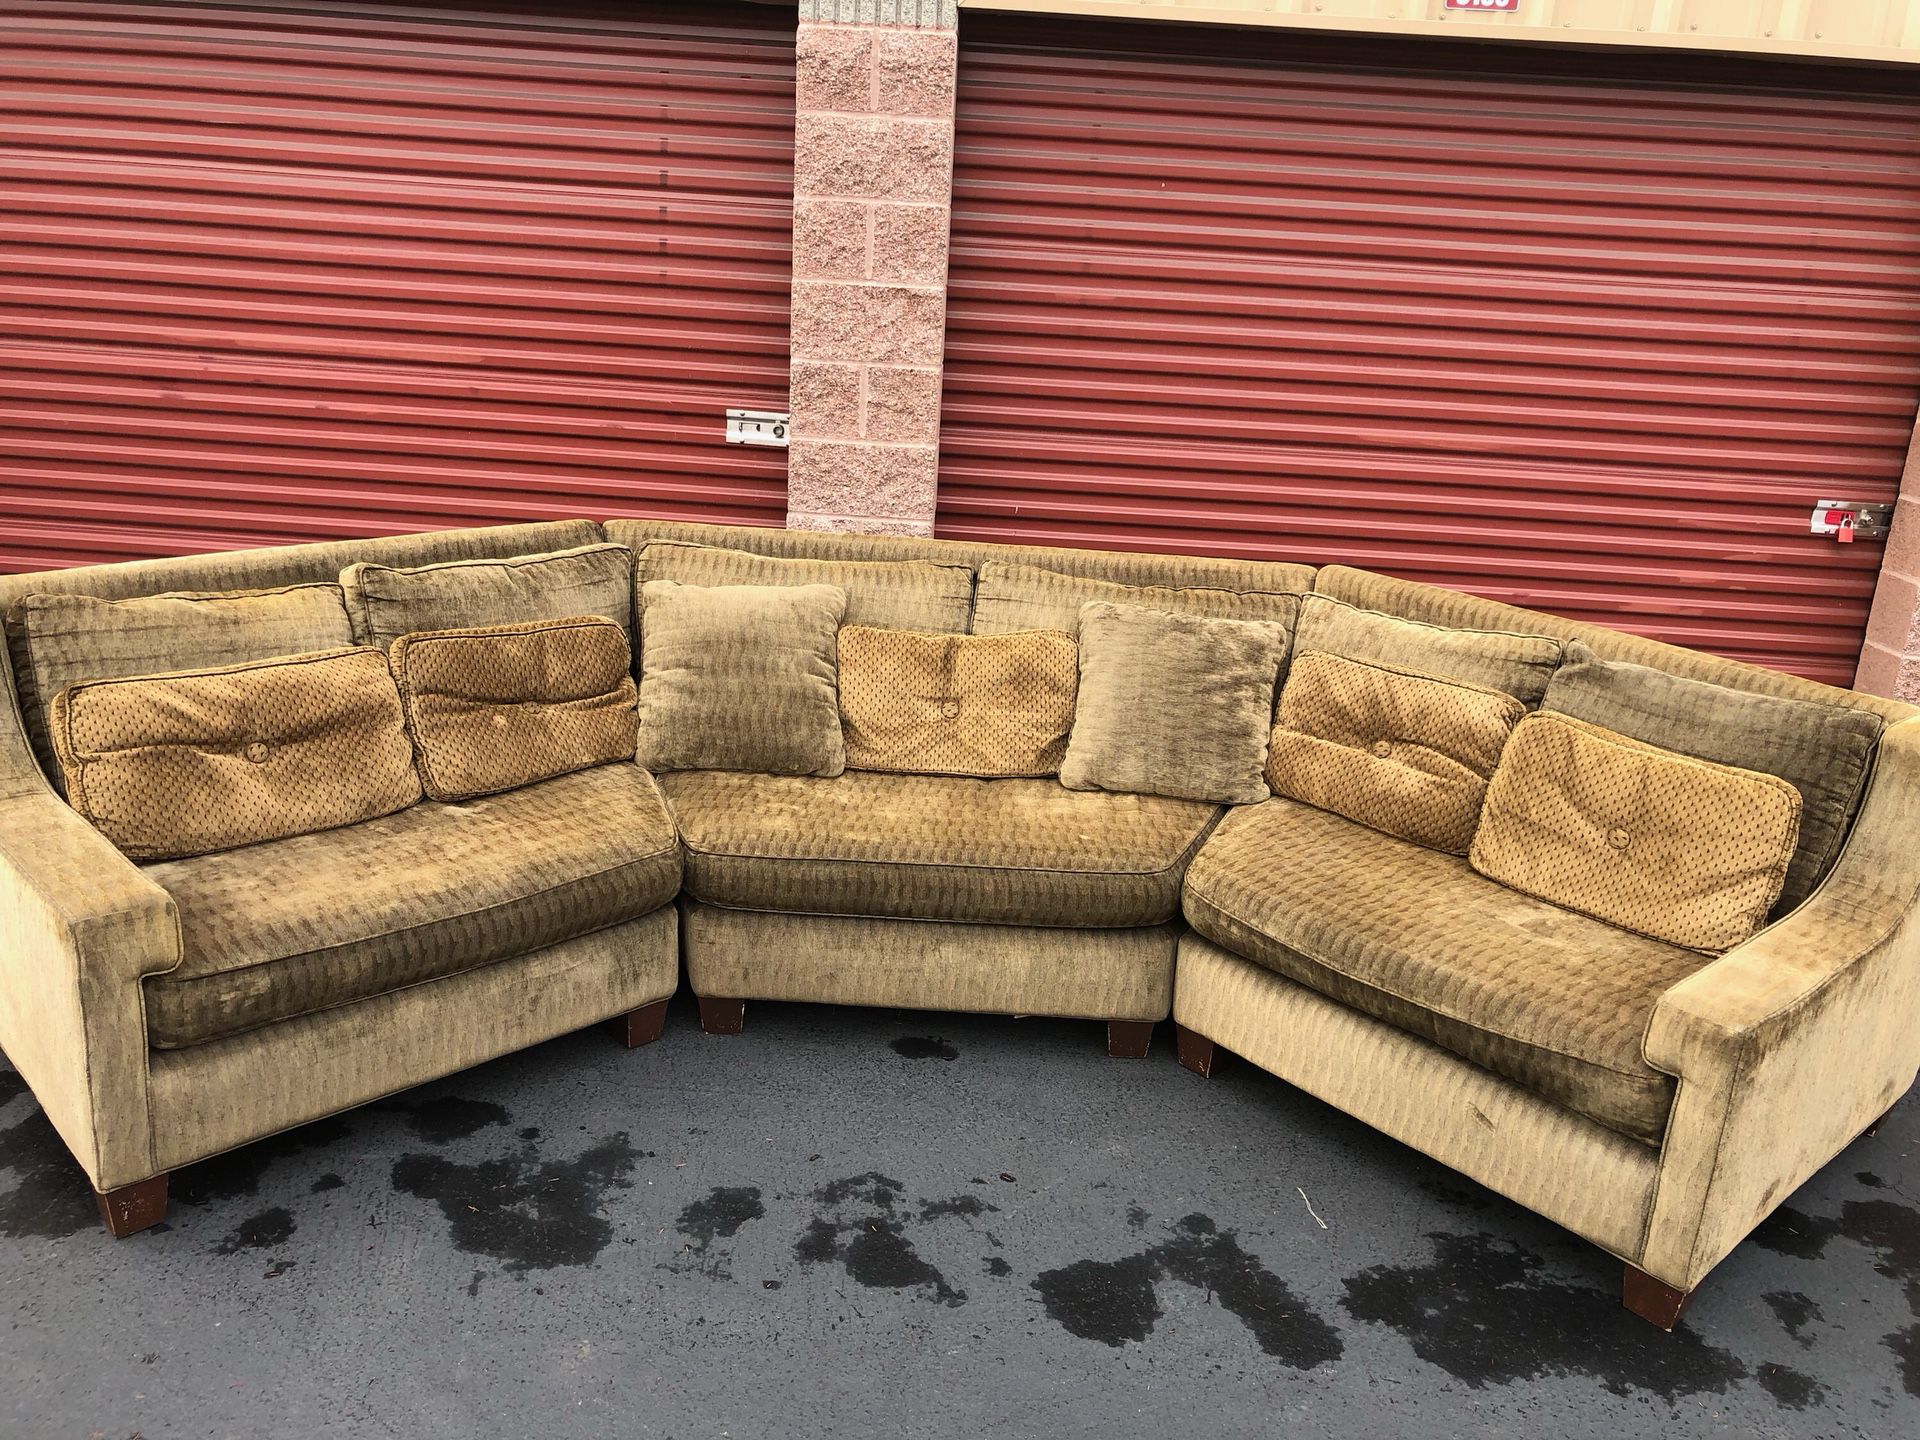 Excellent sectional couch in awesome condition